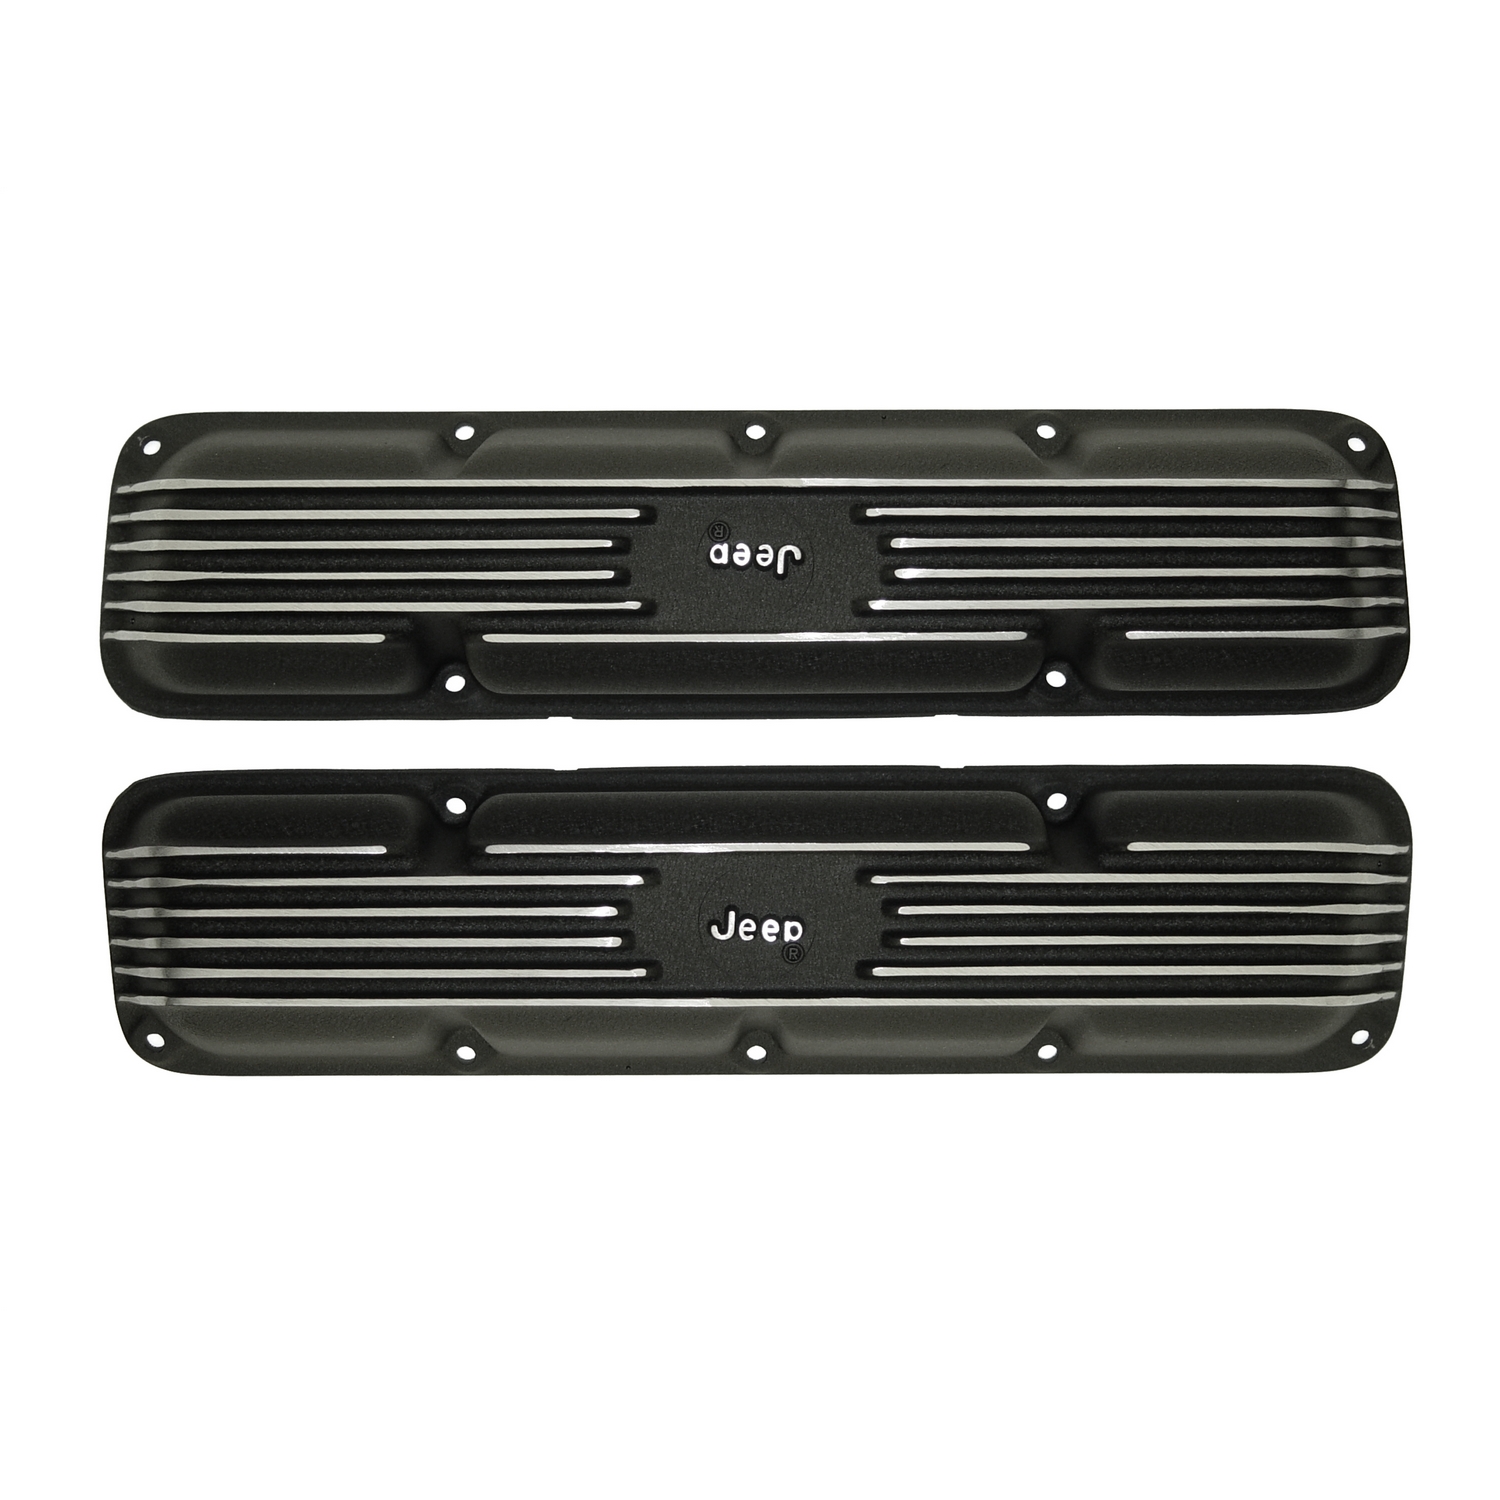 Engine Valve Cover Kit with Jeep Script for Full Size Jeeps w/5.0L/5.9L/6.6L